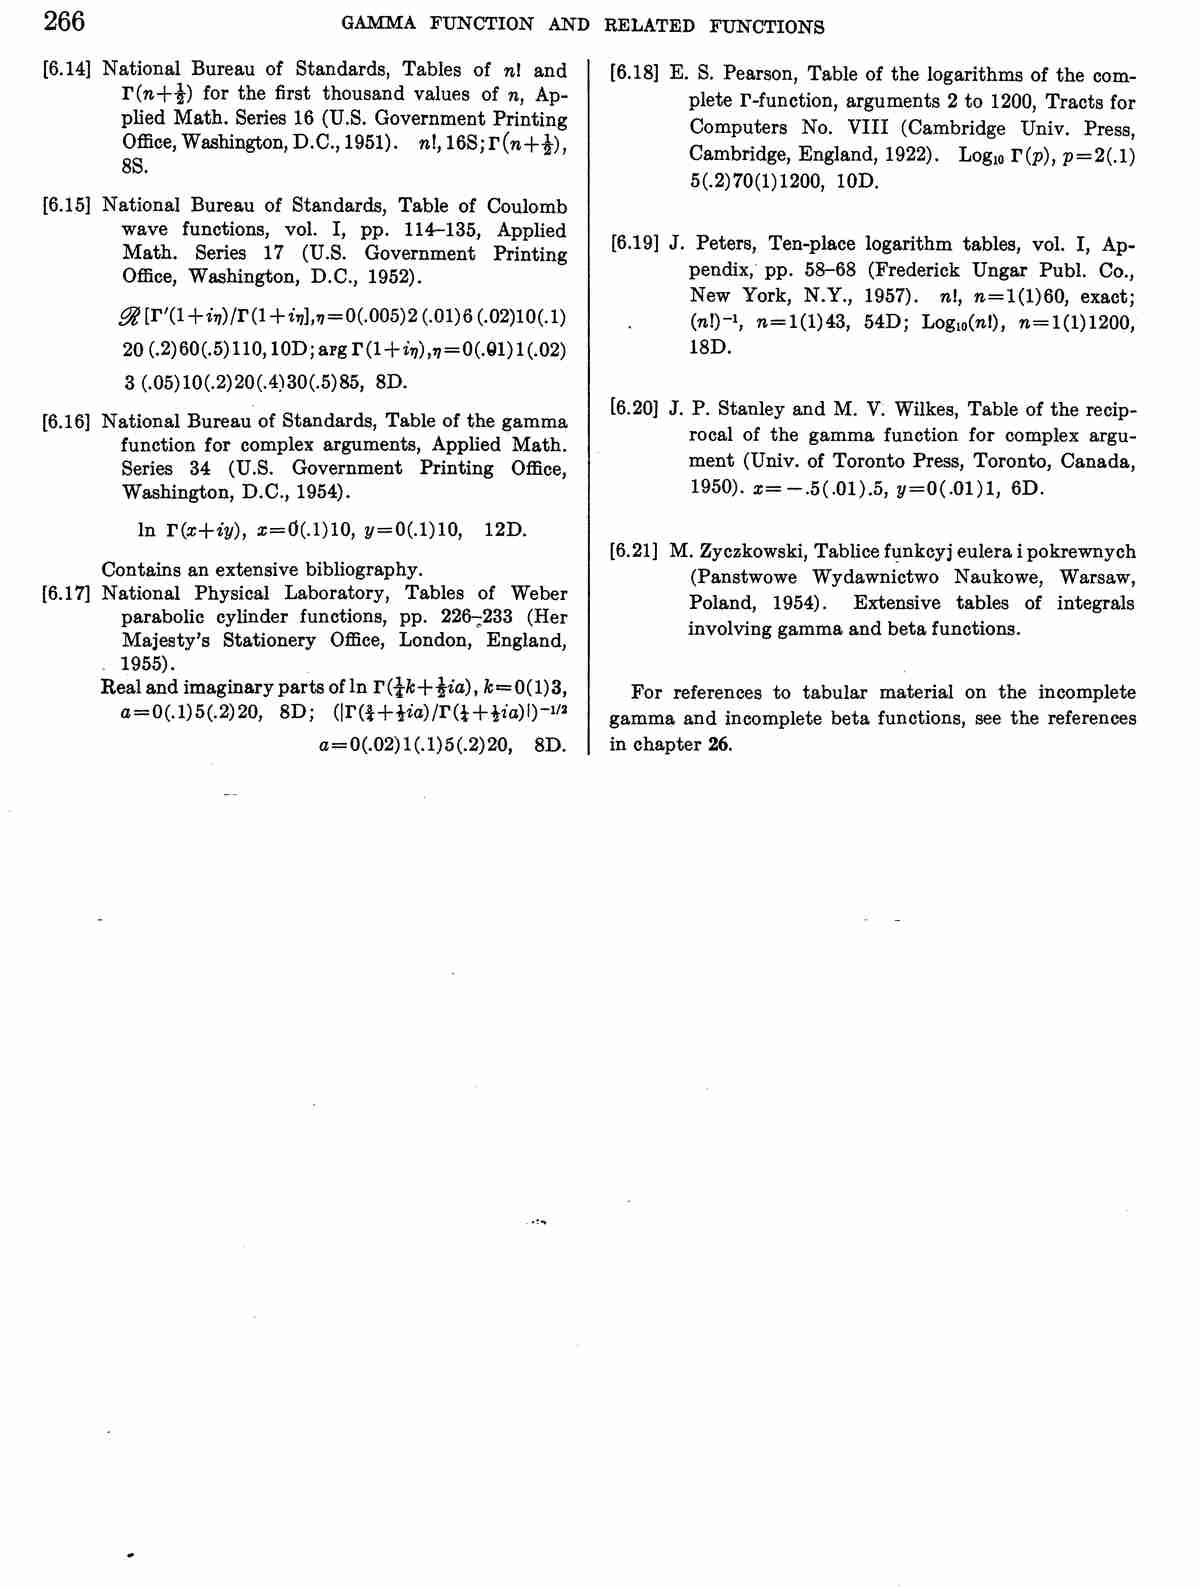 image of page 266